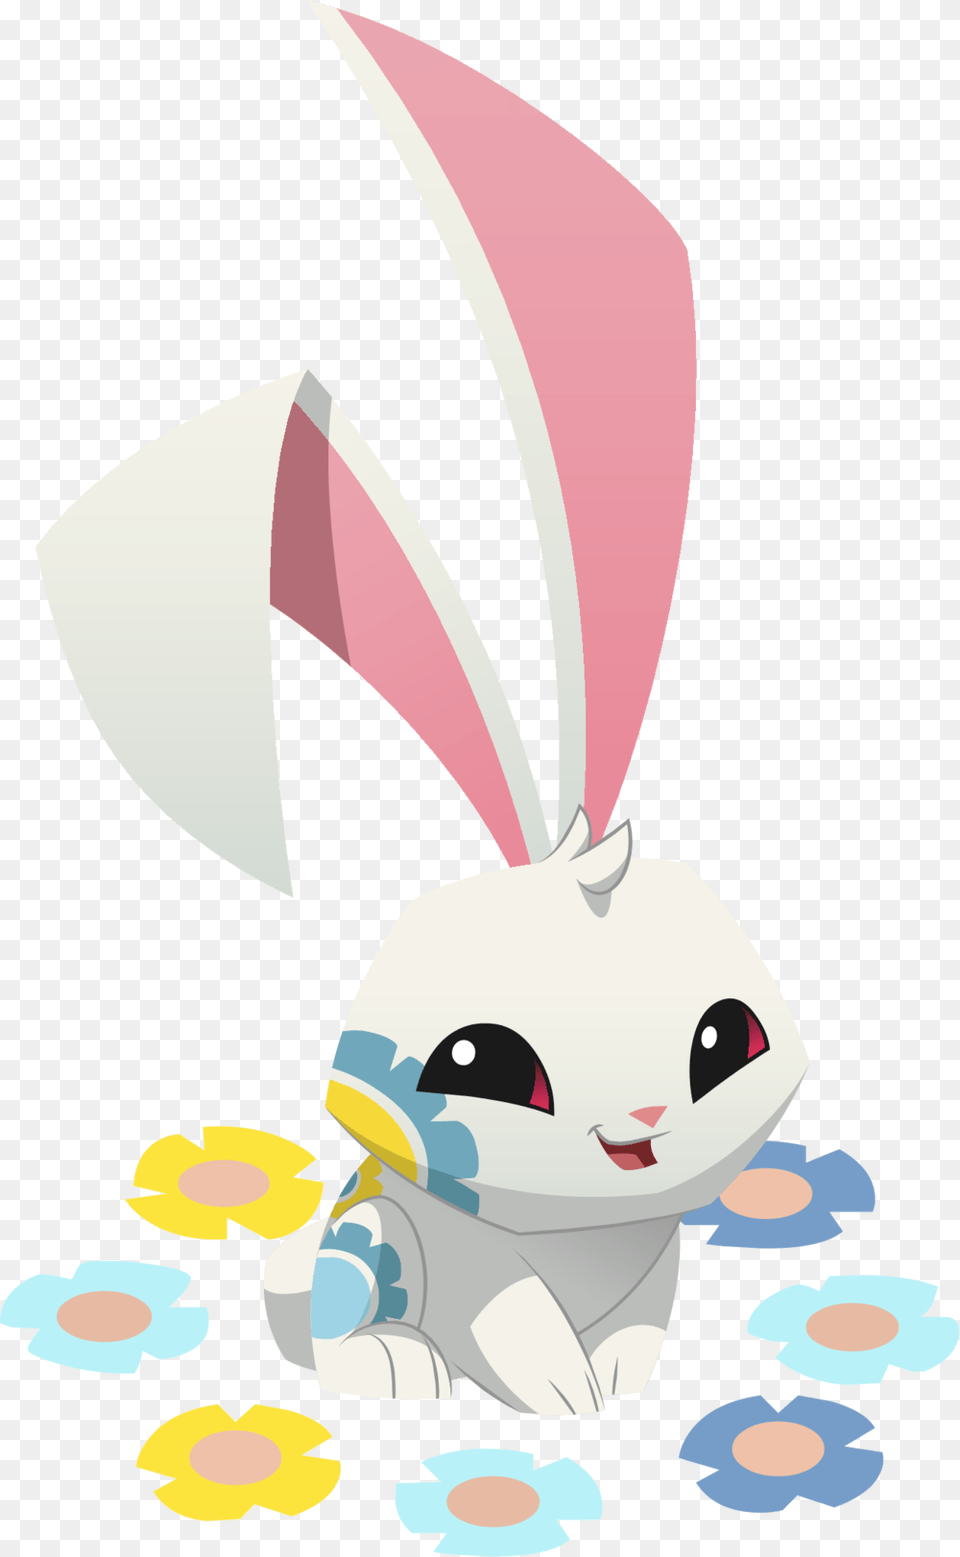 Animals Animal Jam Archives Images Pngio Animal Jam Spring Bunny, Art, Graphics, Paper, Fish Png